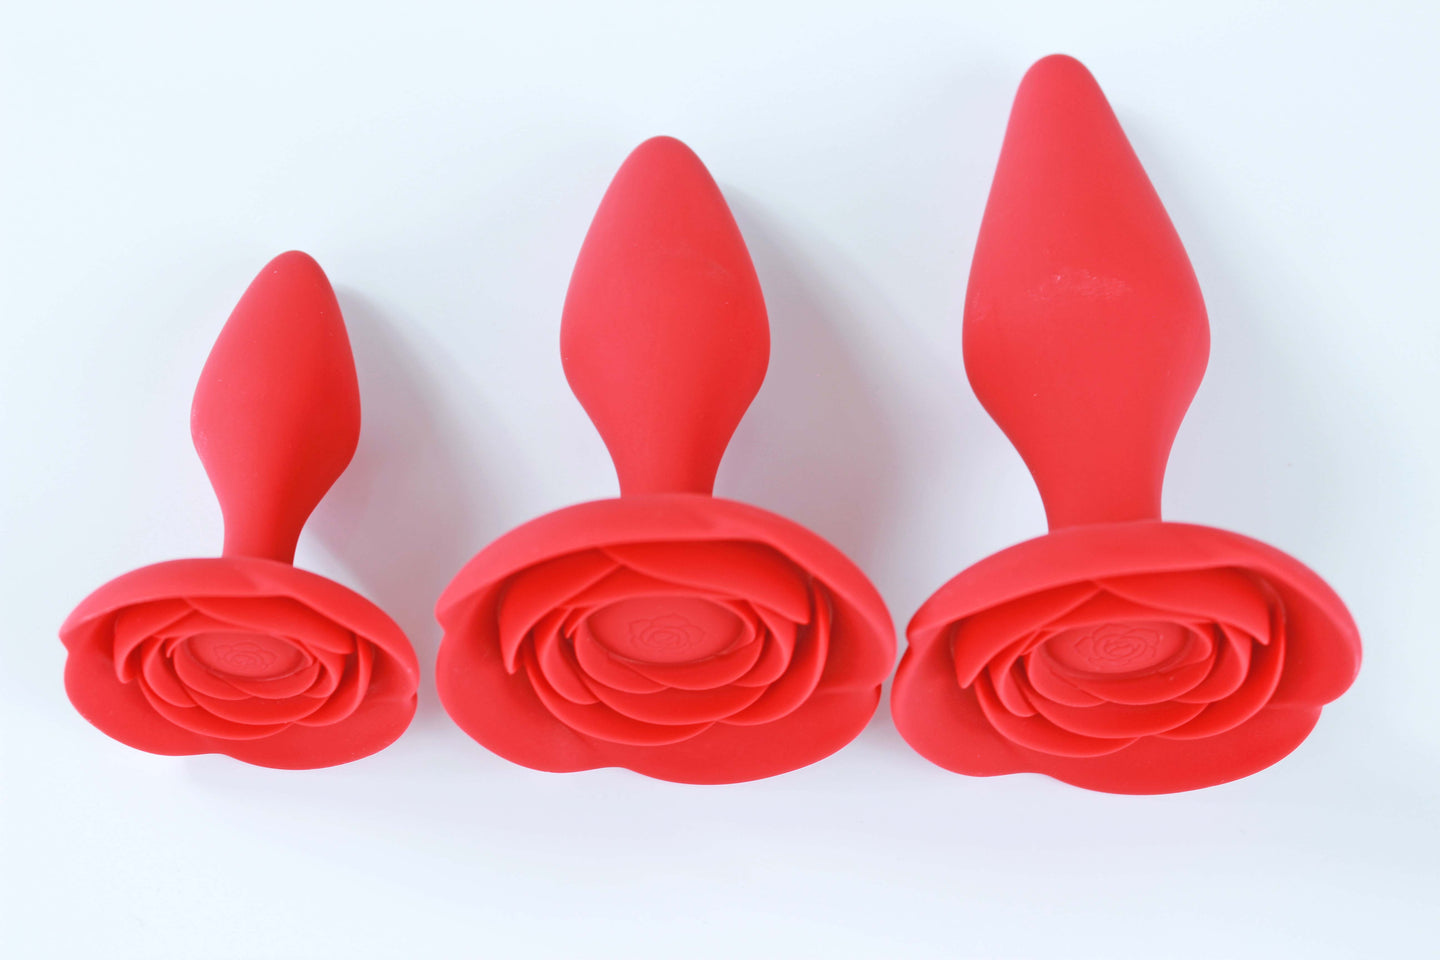 3  sizes of red rose anal training butt plugs on a white background